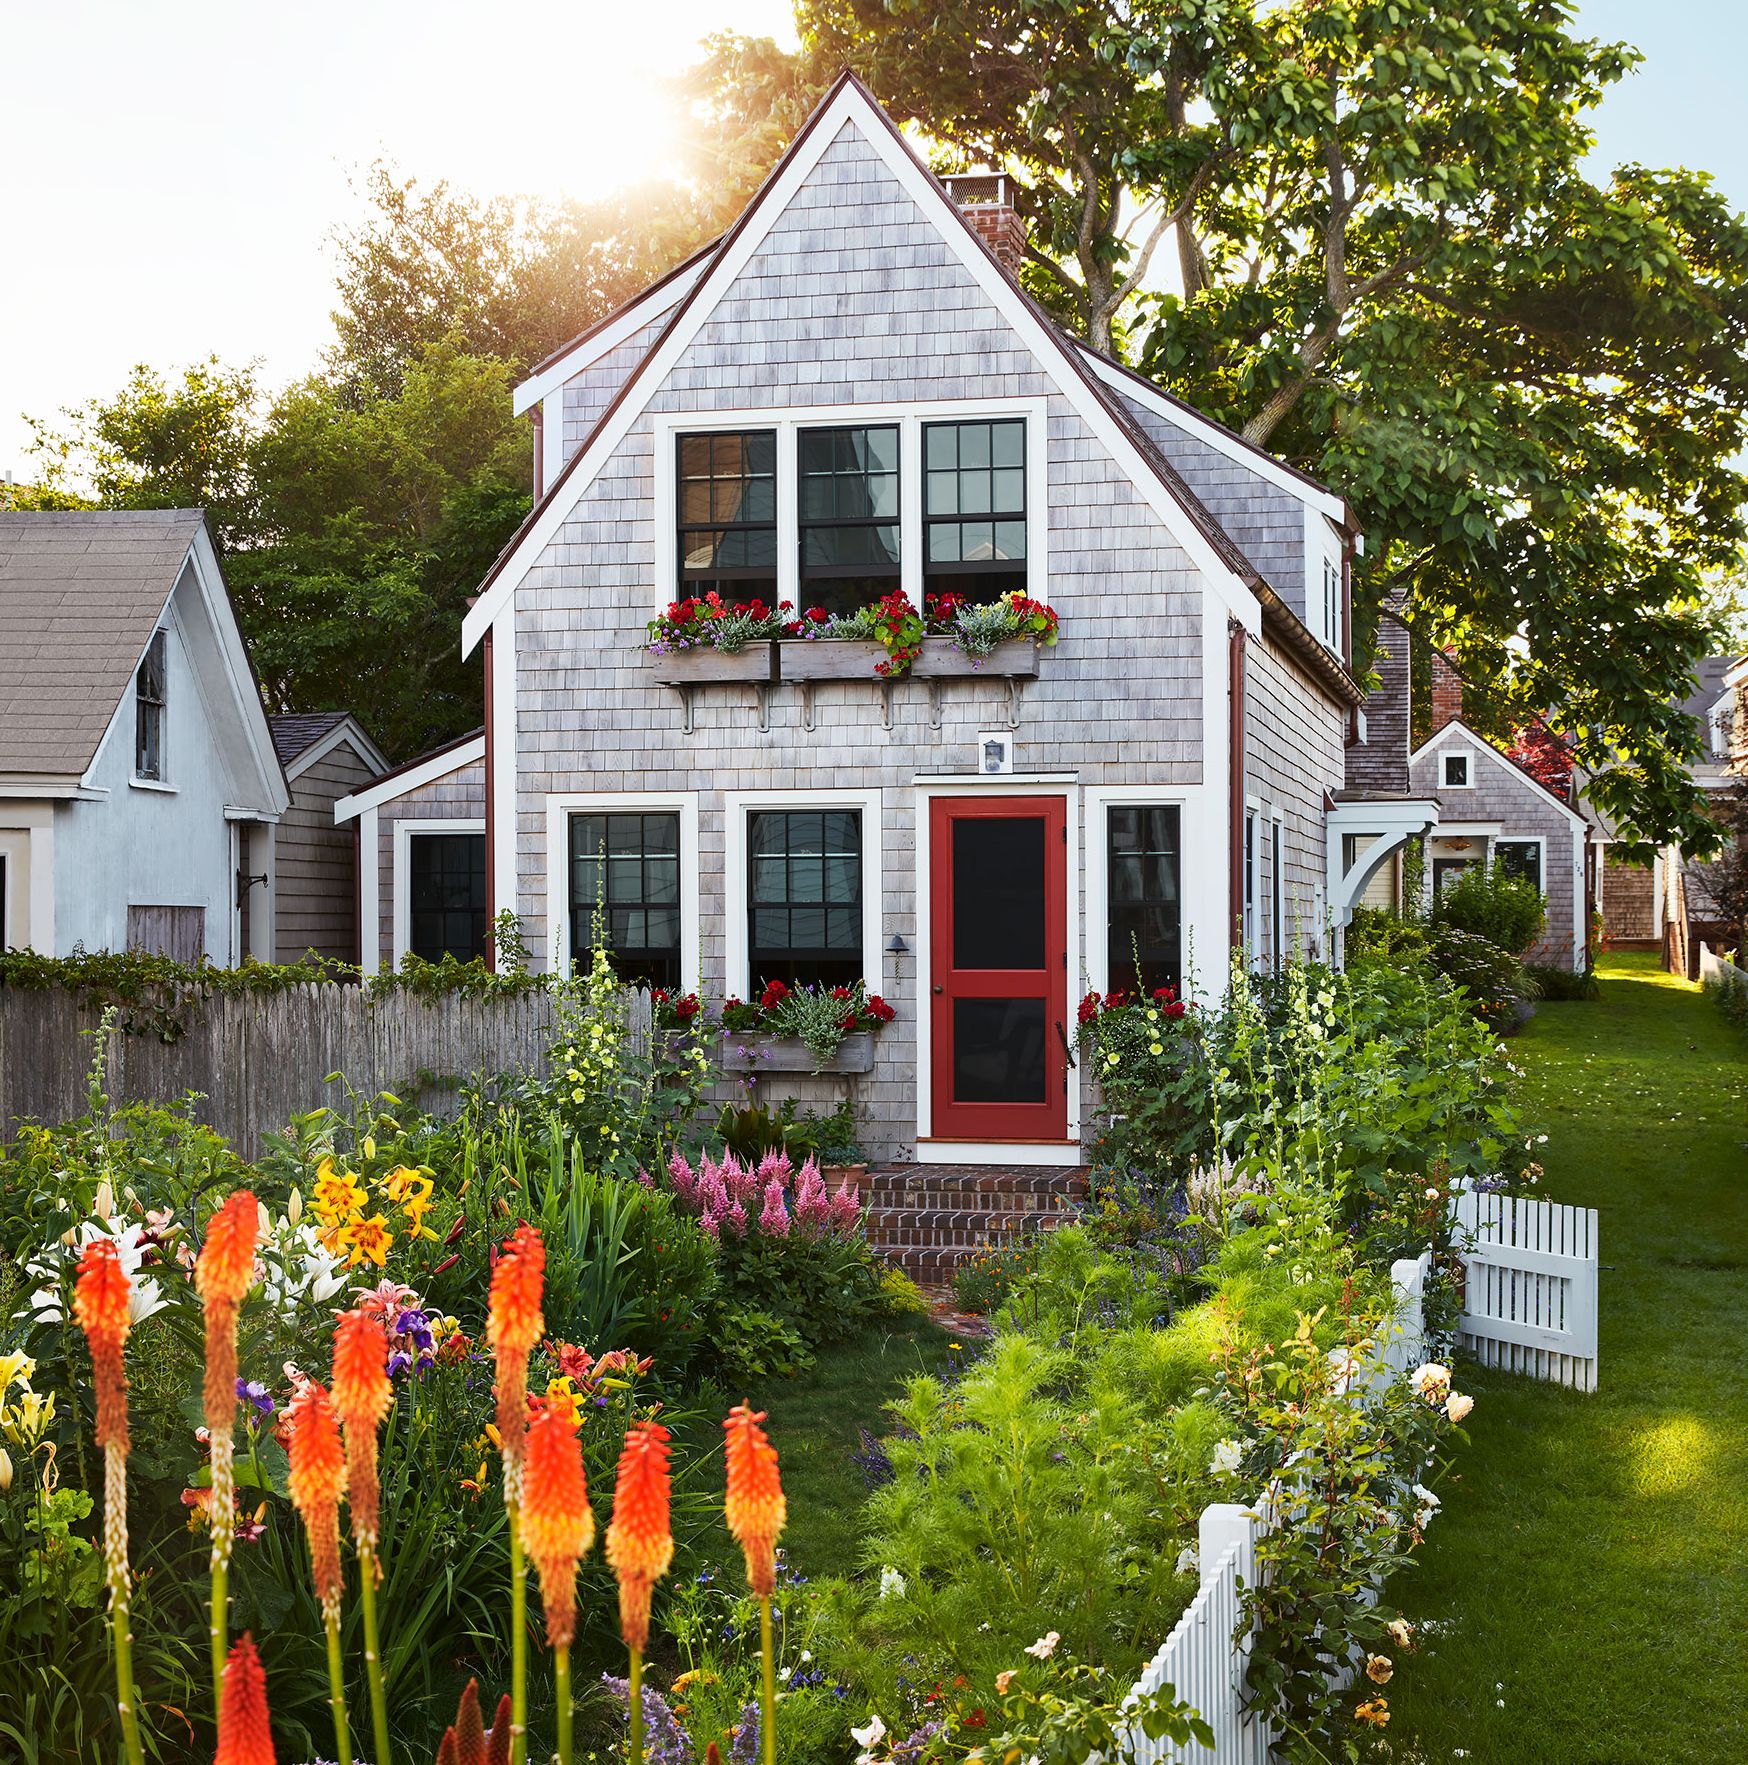 How Two Provincetowners Transformed a Fishing Shack Into a Charming Cottage